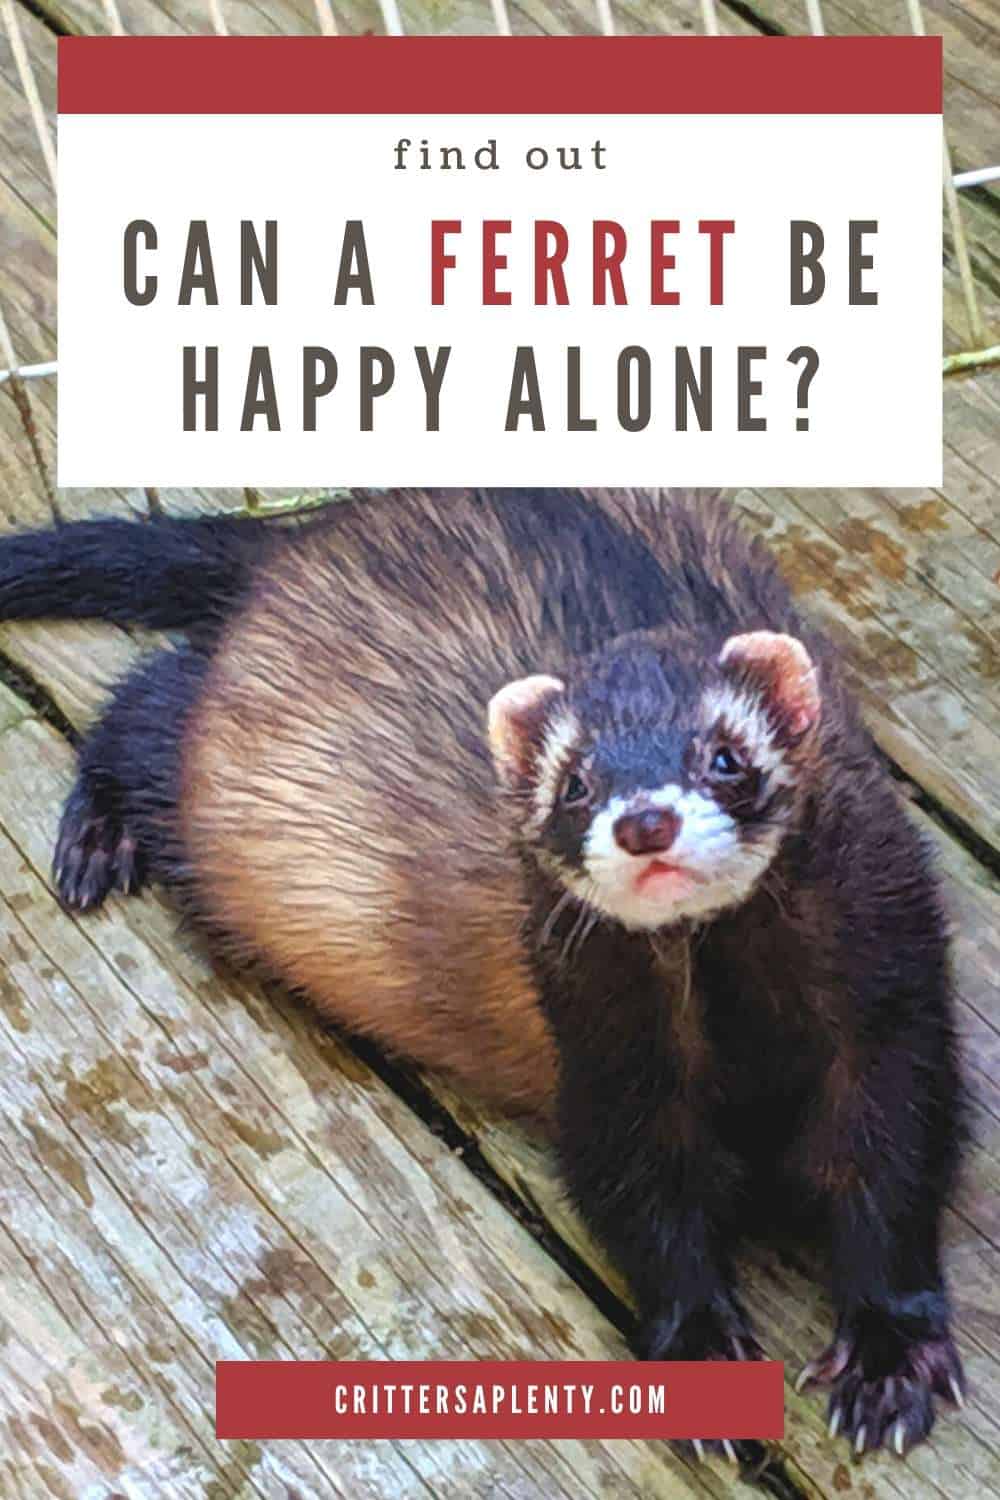 Are you considering getting a ferret? Ferrets make great pets and are lots of fun. Perhaps you're trying to decide whether to get one or two ferrets? Ferrets are naturally quite sociable creatures; they do enjoy living in groups. Find out if ferrets can be happy living alone or if they would prefer company. #pets #ferrets #smallpets via @crittersaplenty